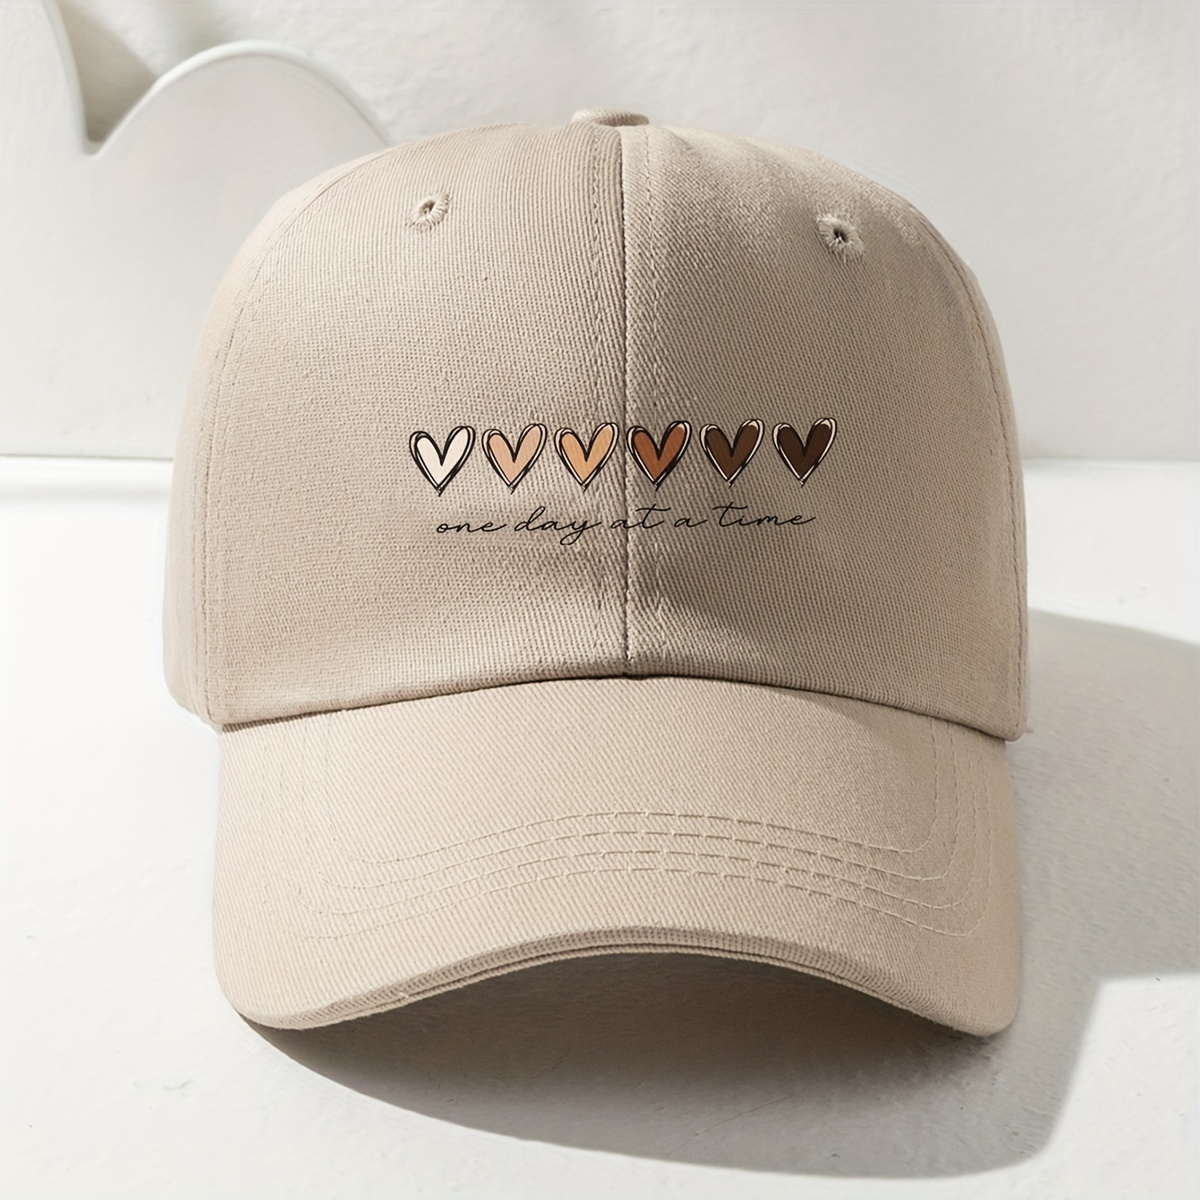 

Gradient Hearts Print Baseball Cap, Unisex "one Day At A Time" Lettering, Breathable Adjustable Size Peaked Hat